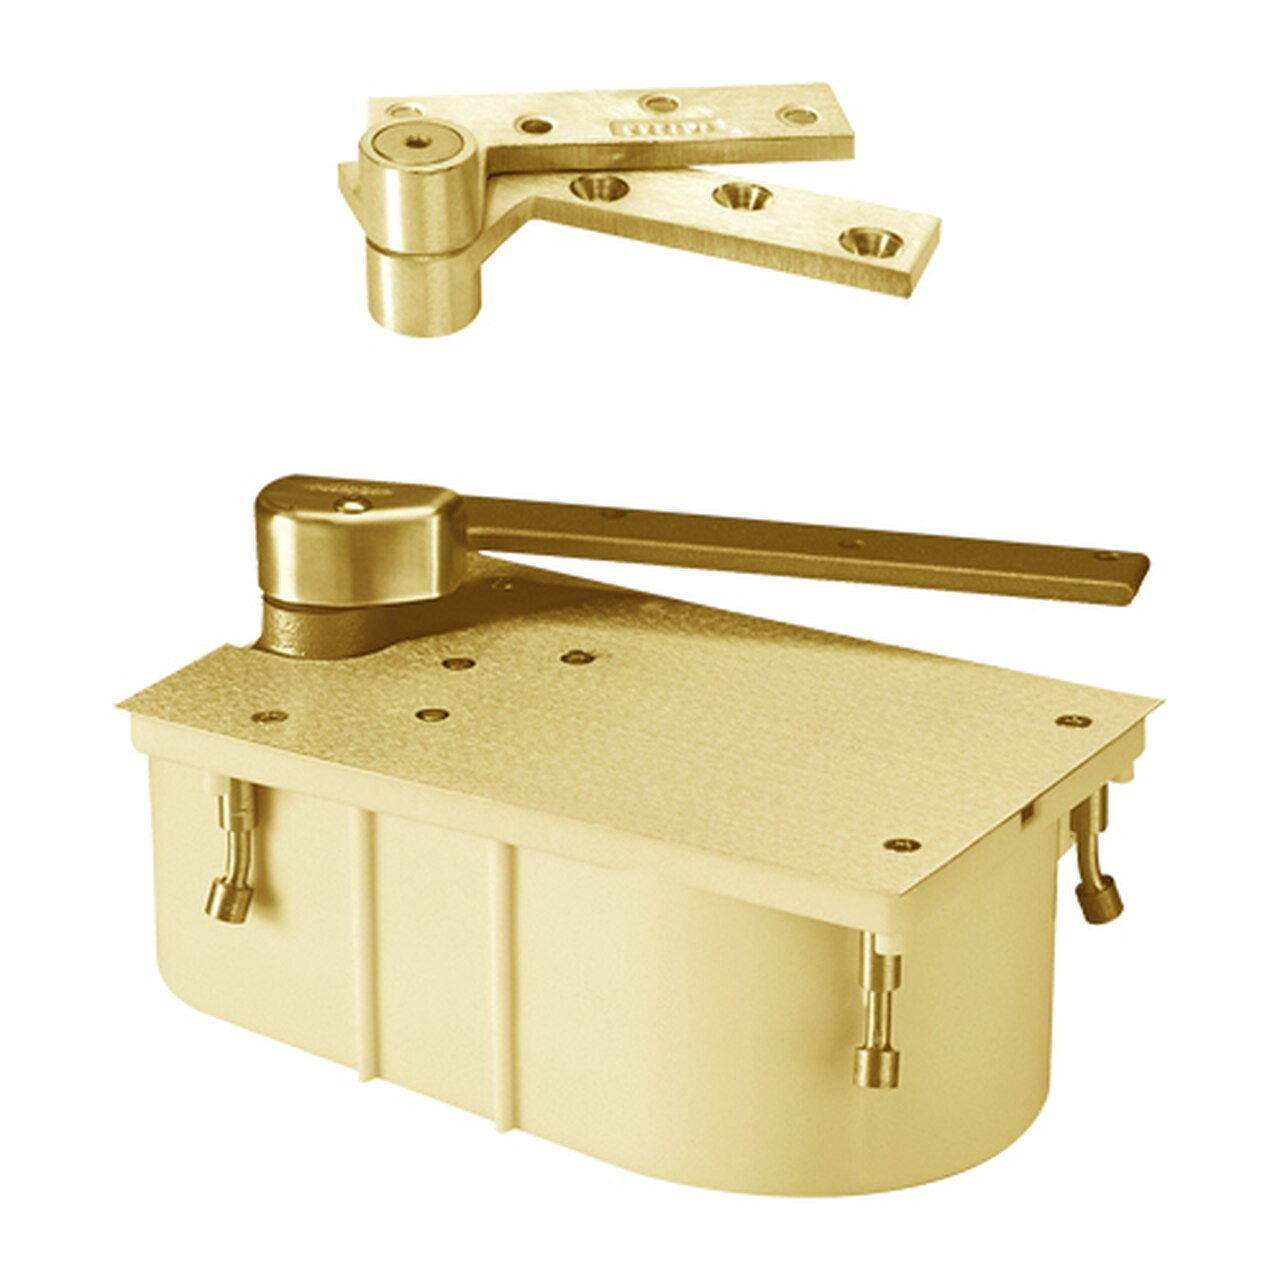 F27-90N-LFP-CWF-LH-605 Rixson 27 Series Fire Rated Heavy Duty 3/4" Offset Hung Floor Closer in Bright Brass Finish